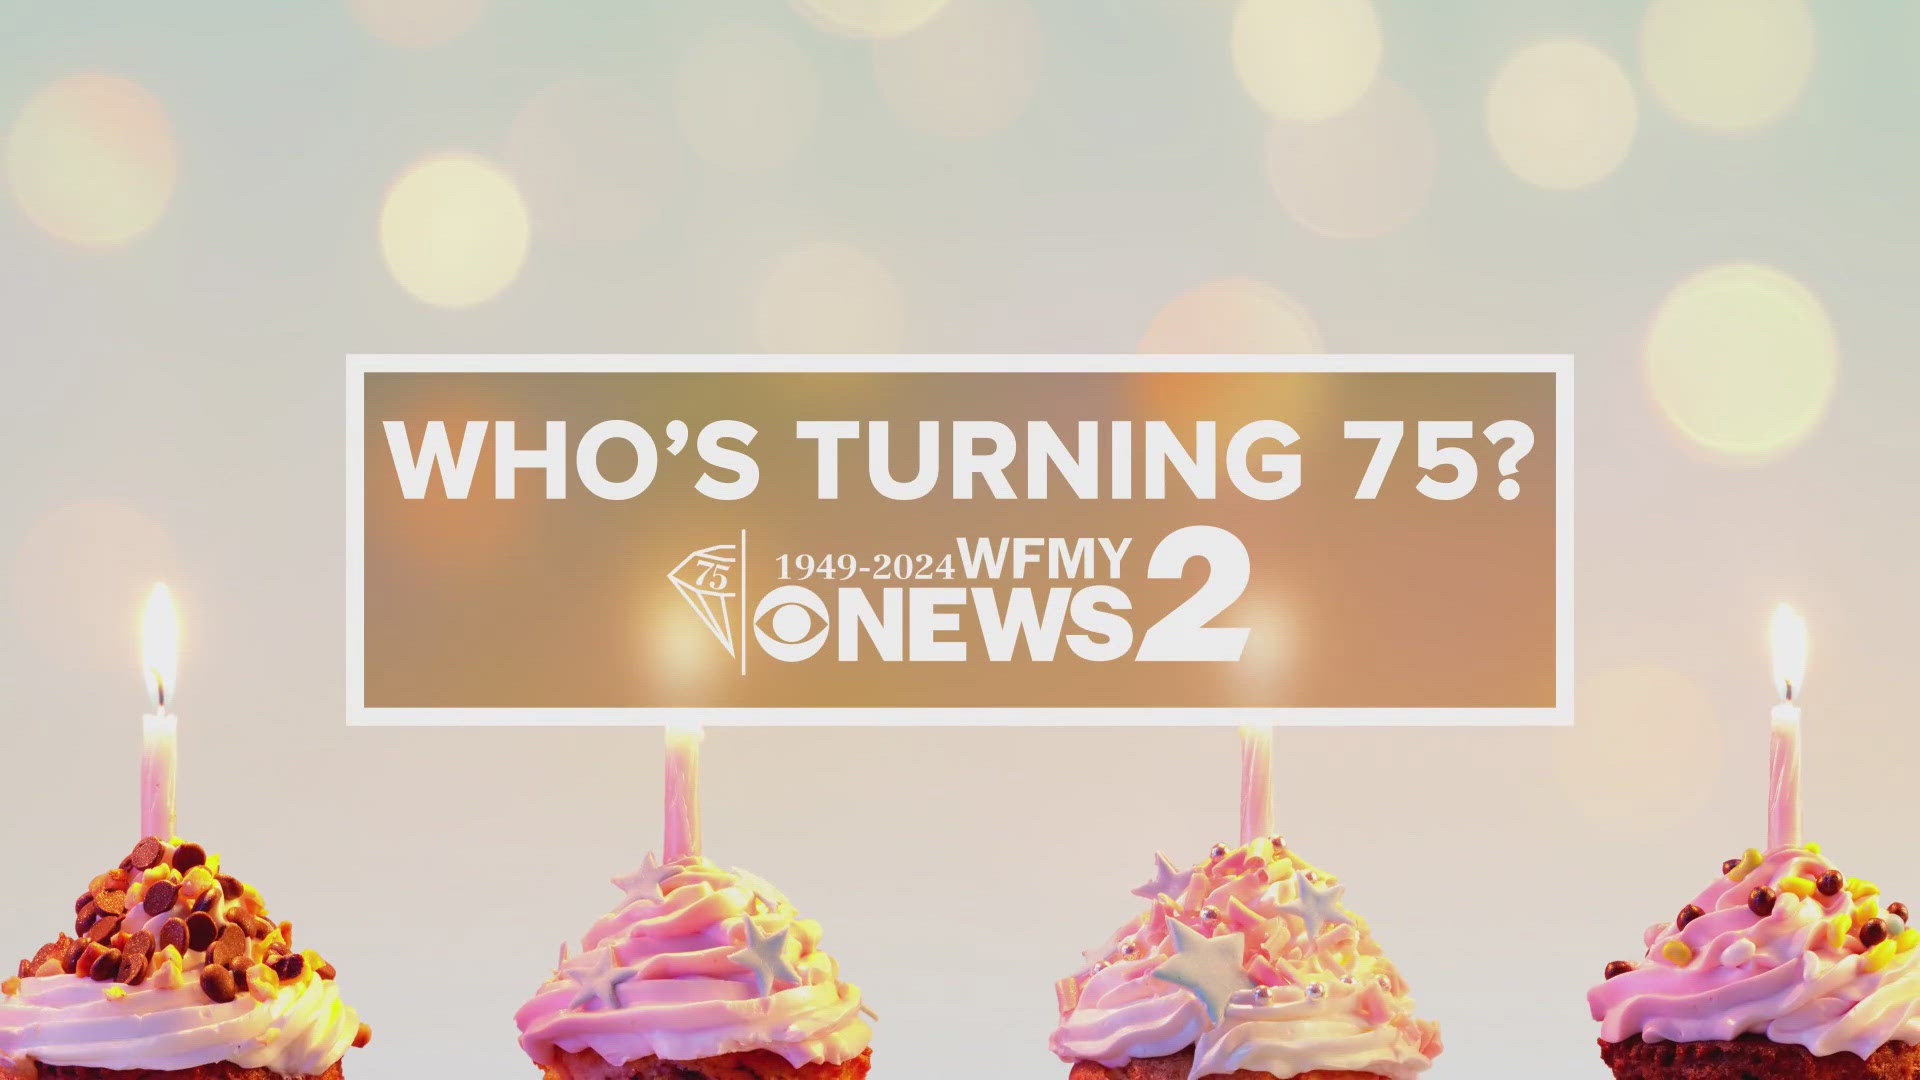 WFMY News 2 is turning 75 and want to wish viewers turning 75 a Happy Birthday, too!